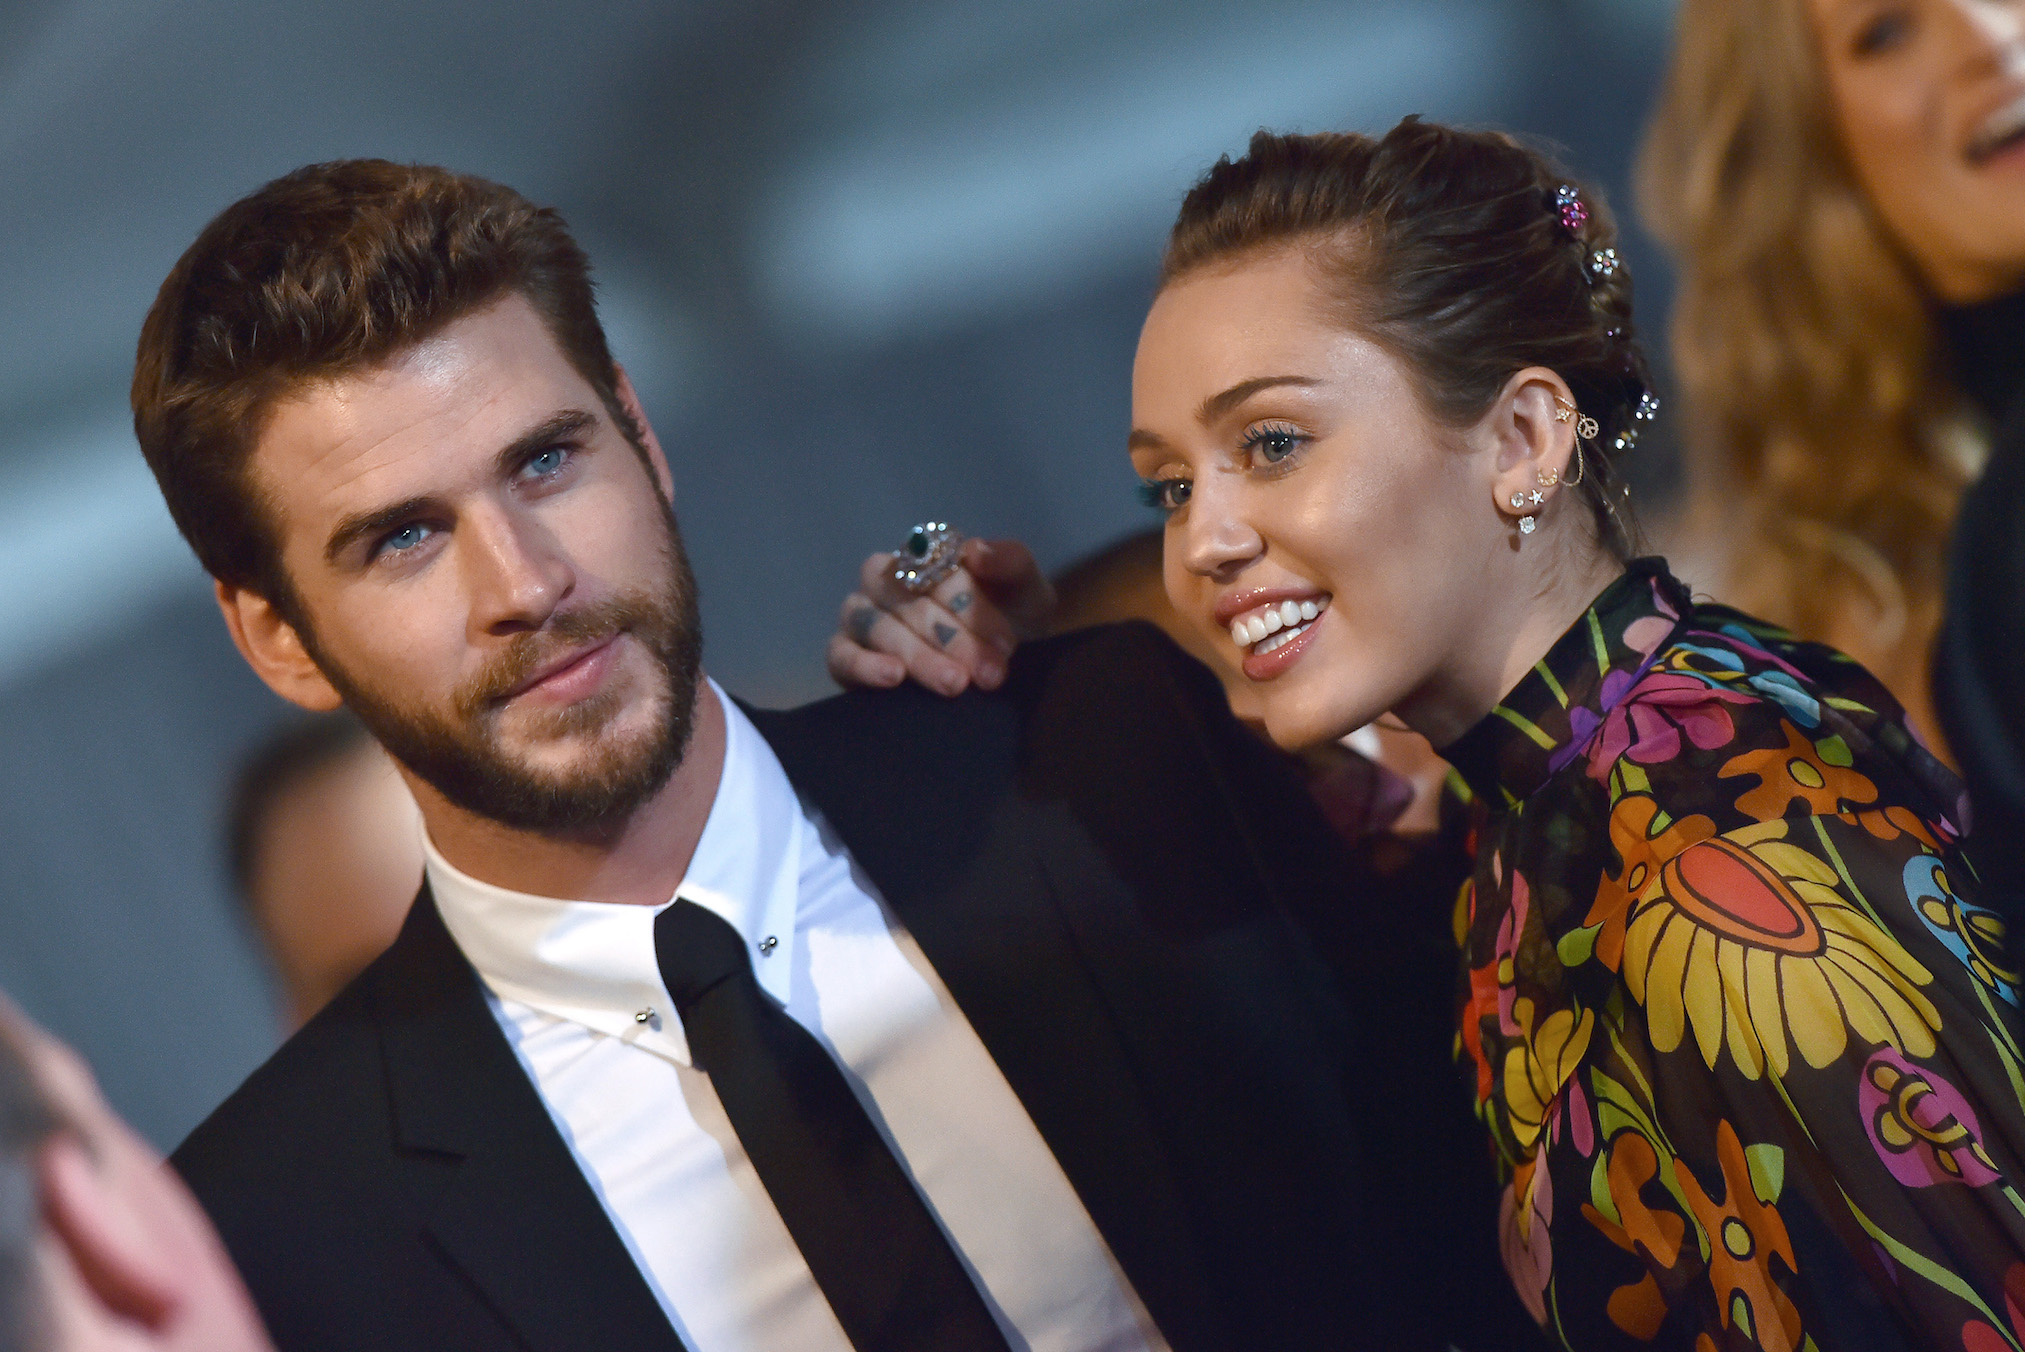 Liam Hemsworth and singer Miley Cyrus arrive at the premiere of Disney and Marvel's 'Thor: Ragnarok'